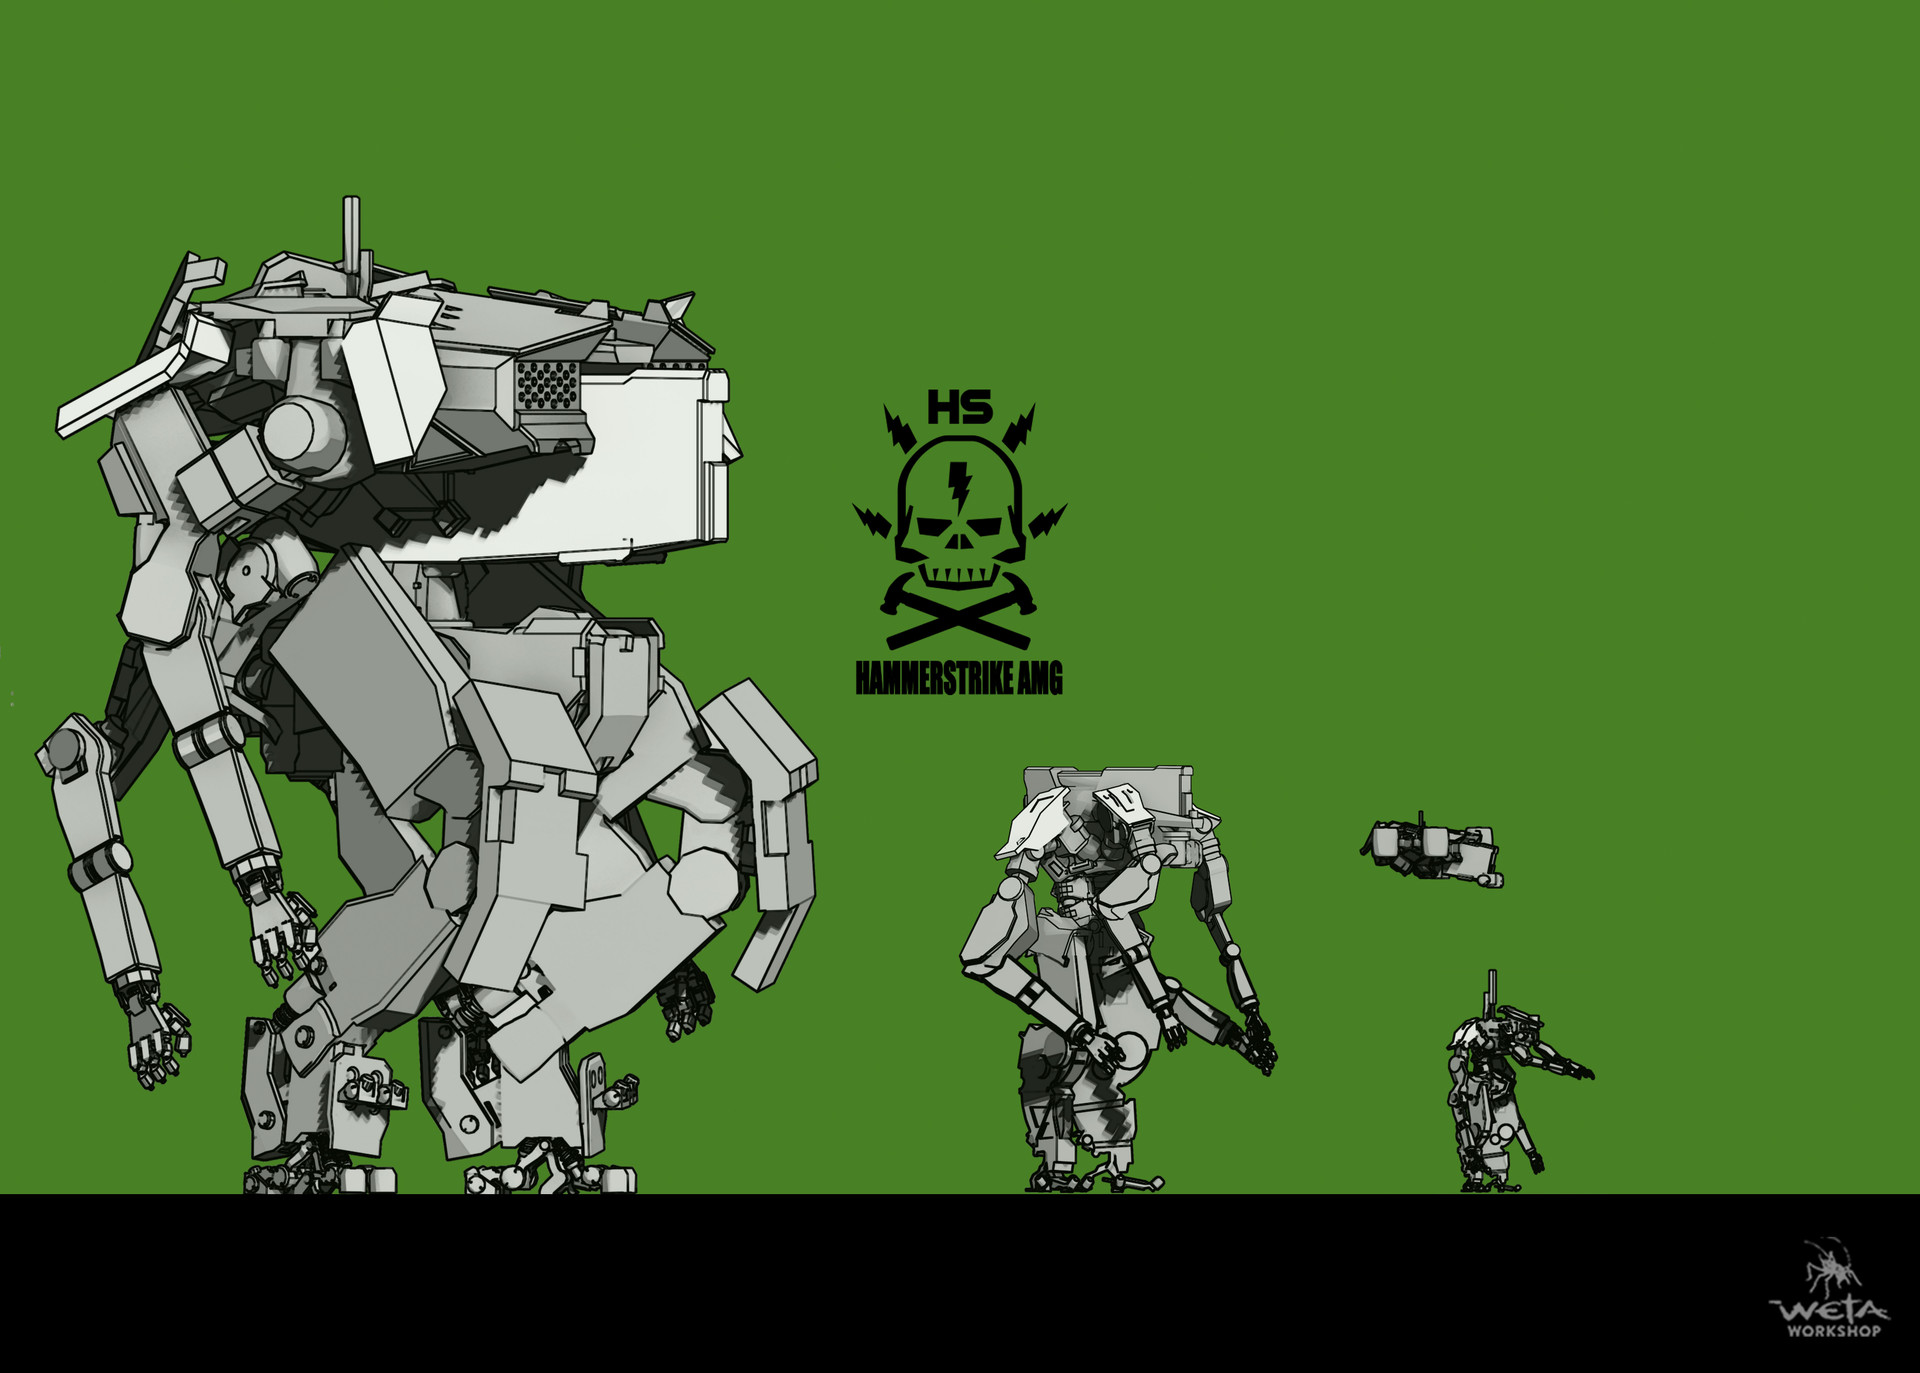 Fine Art: Hope You Like Pictures Of Giant Combat Mechs Because